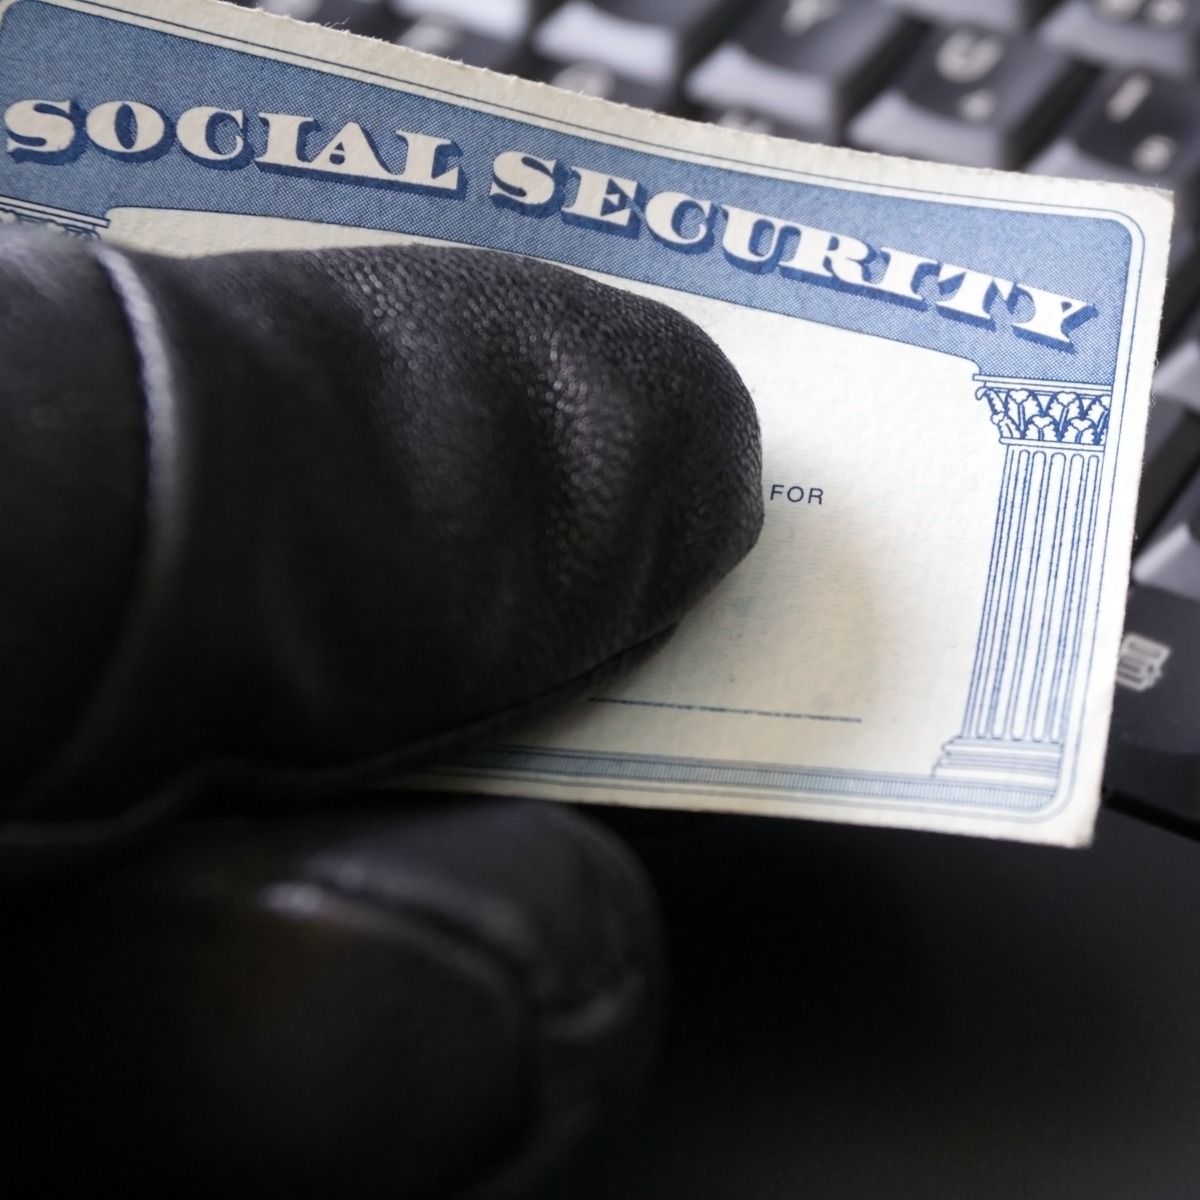 gloved hand holding social security card by computer keyboard